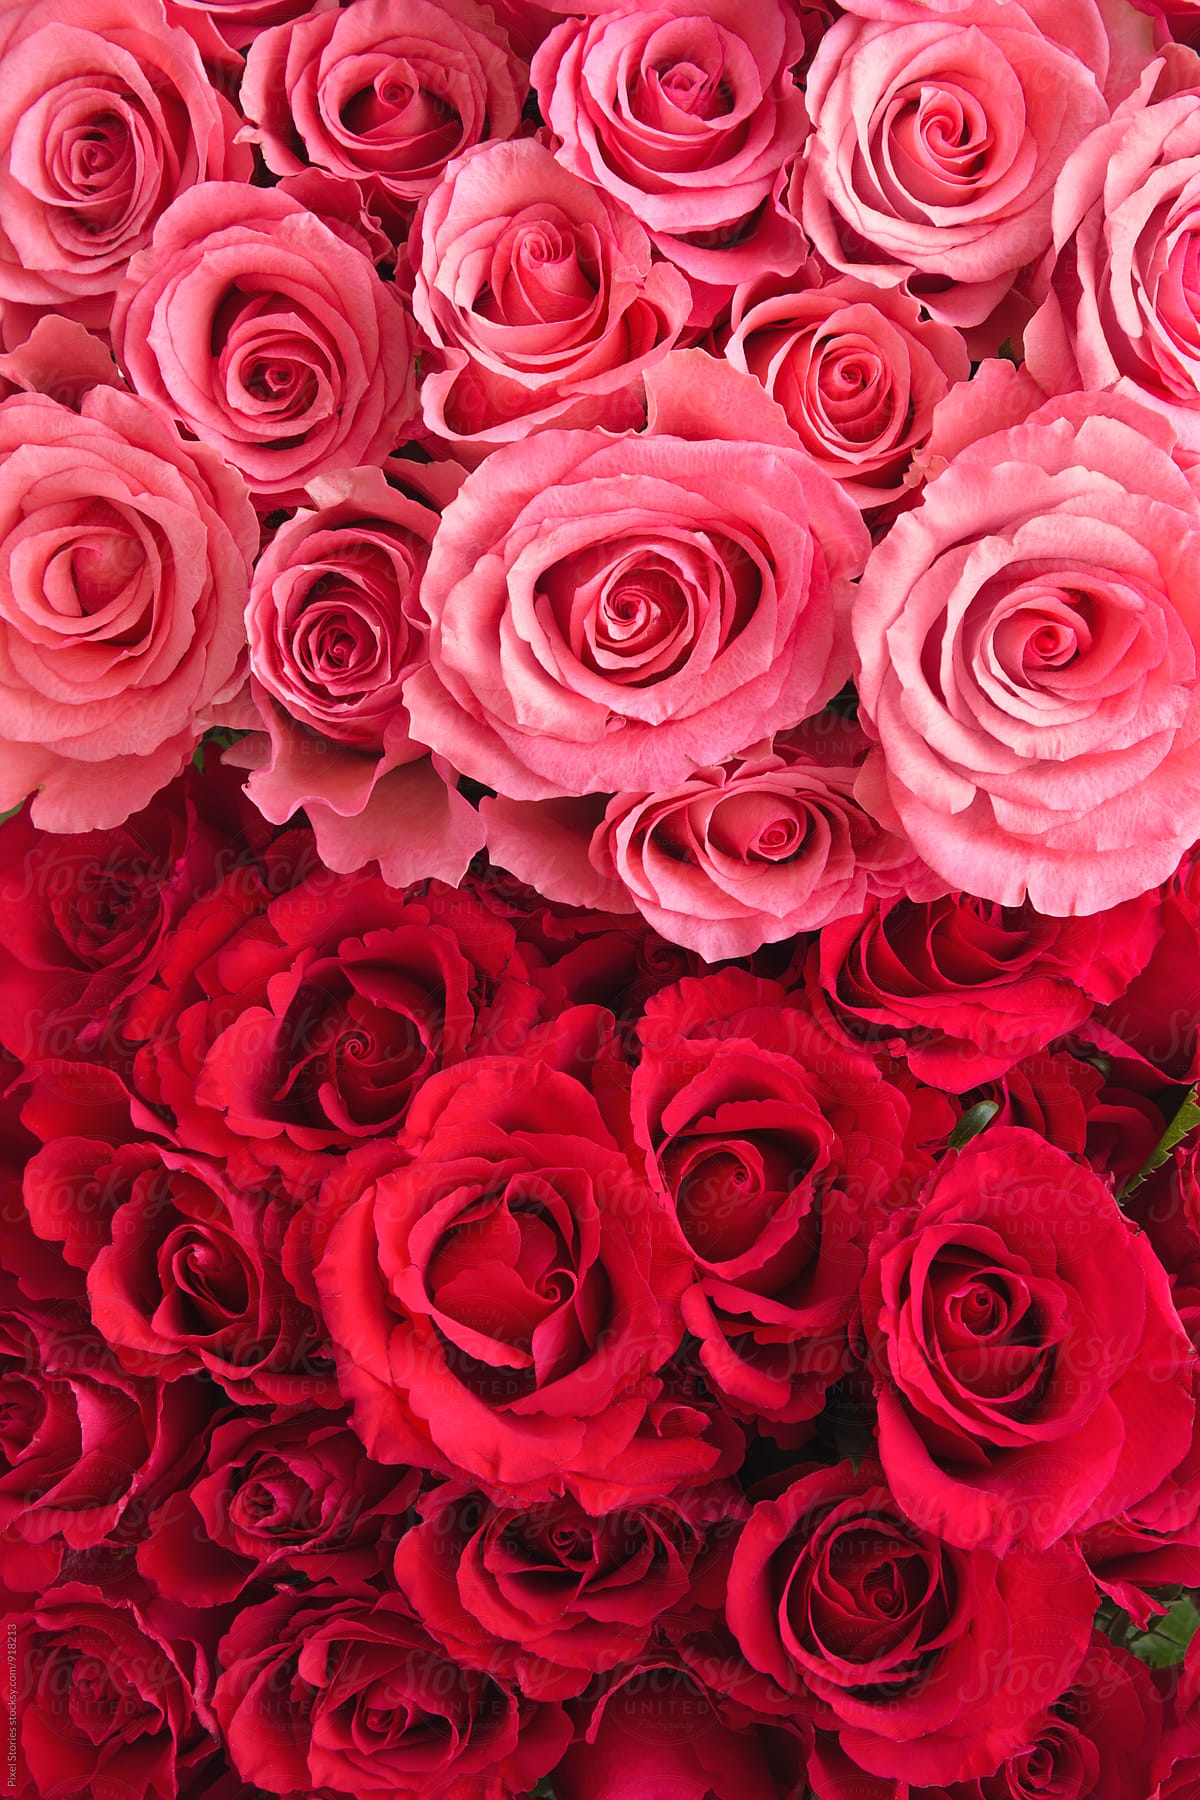 Pink and red roses background by Pixel Stories - Rose - Stocksy United